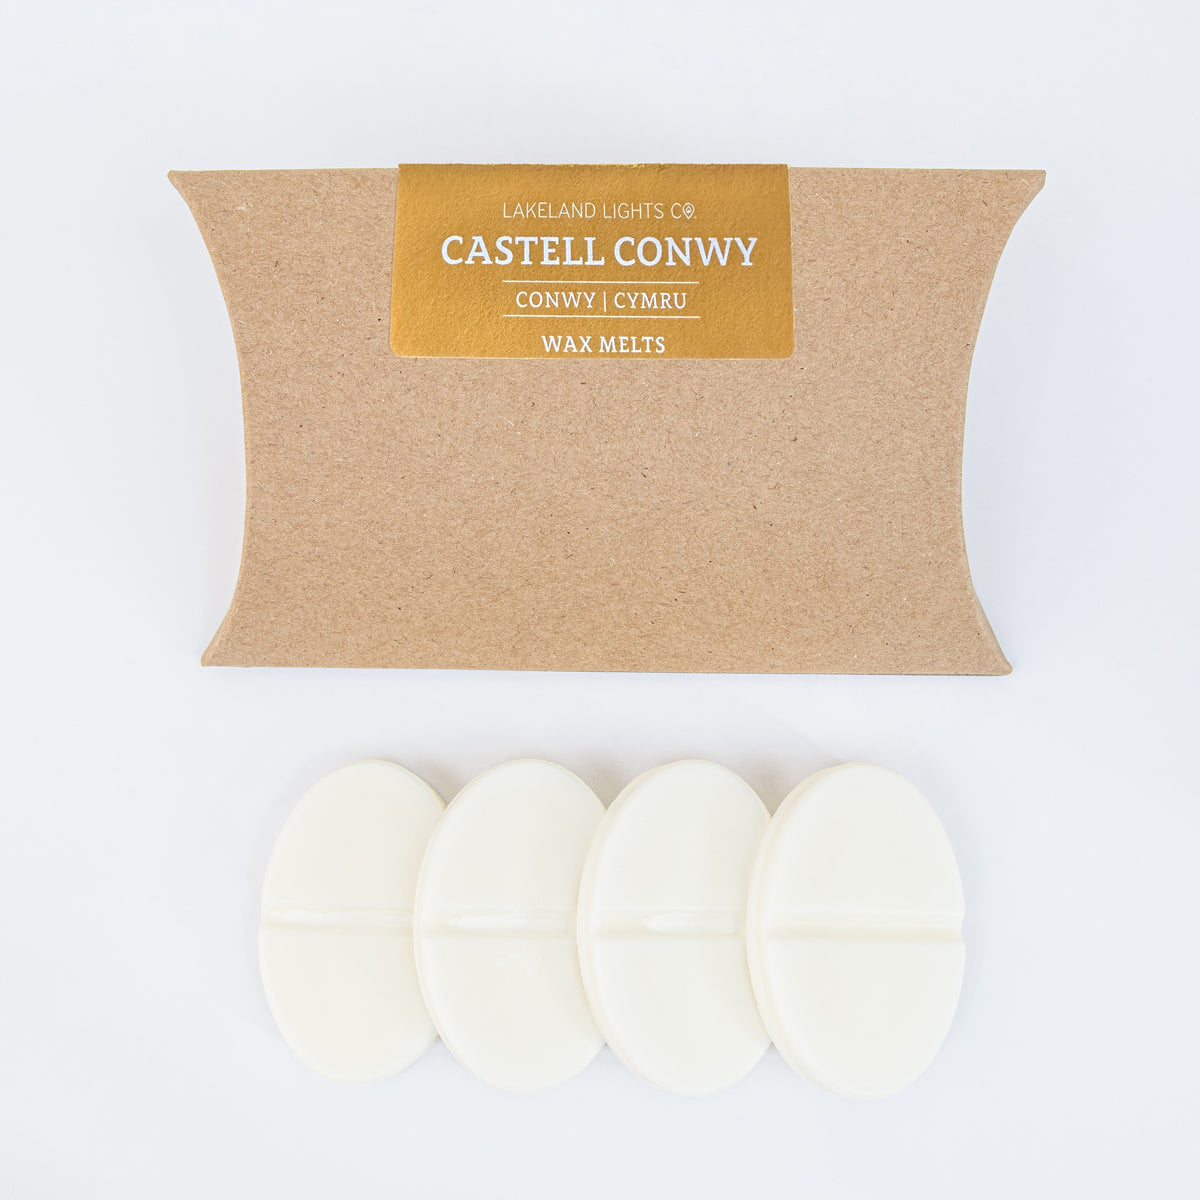 Castell Conwy Wax Melts